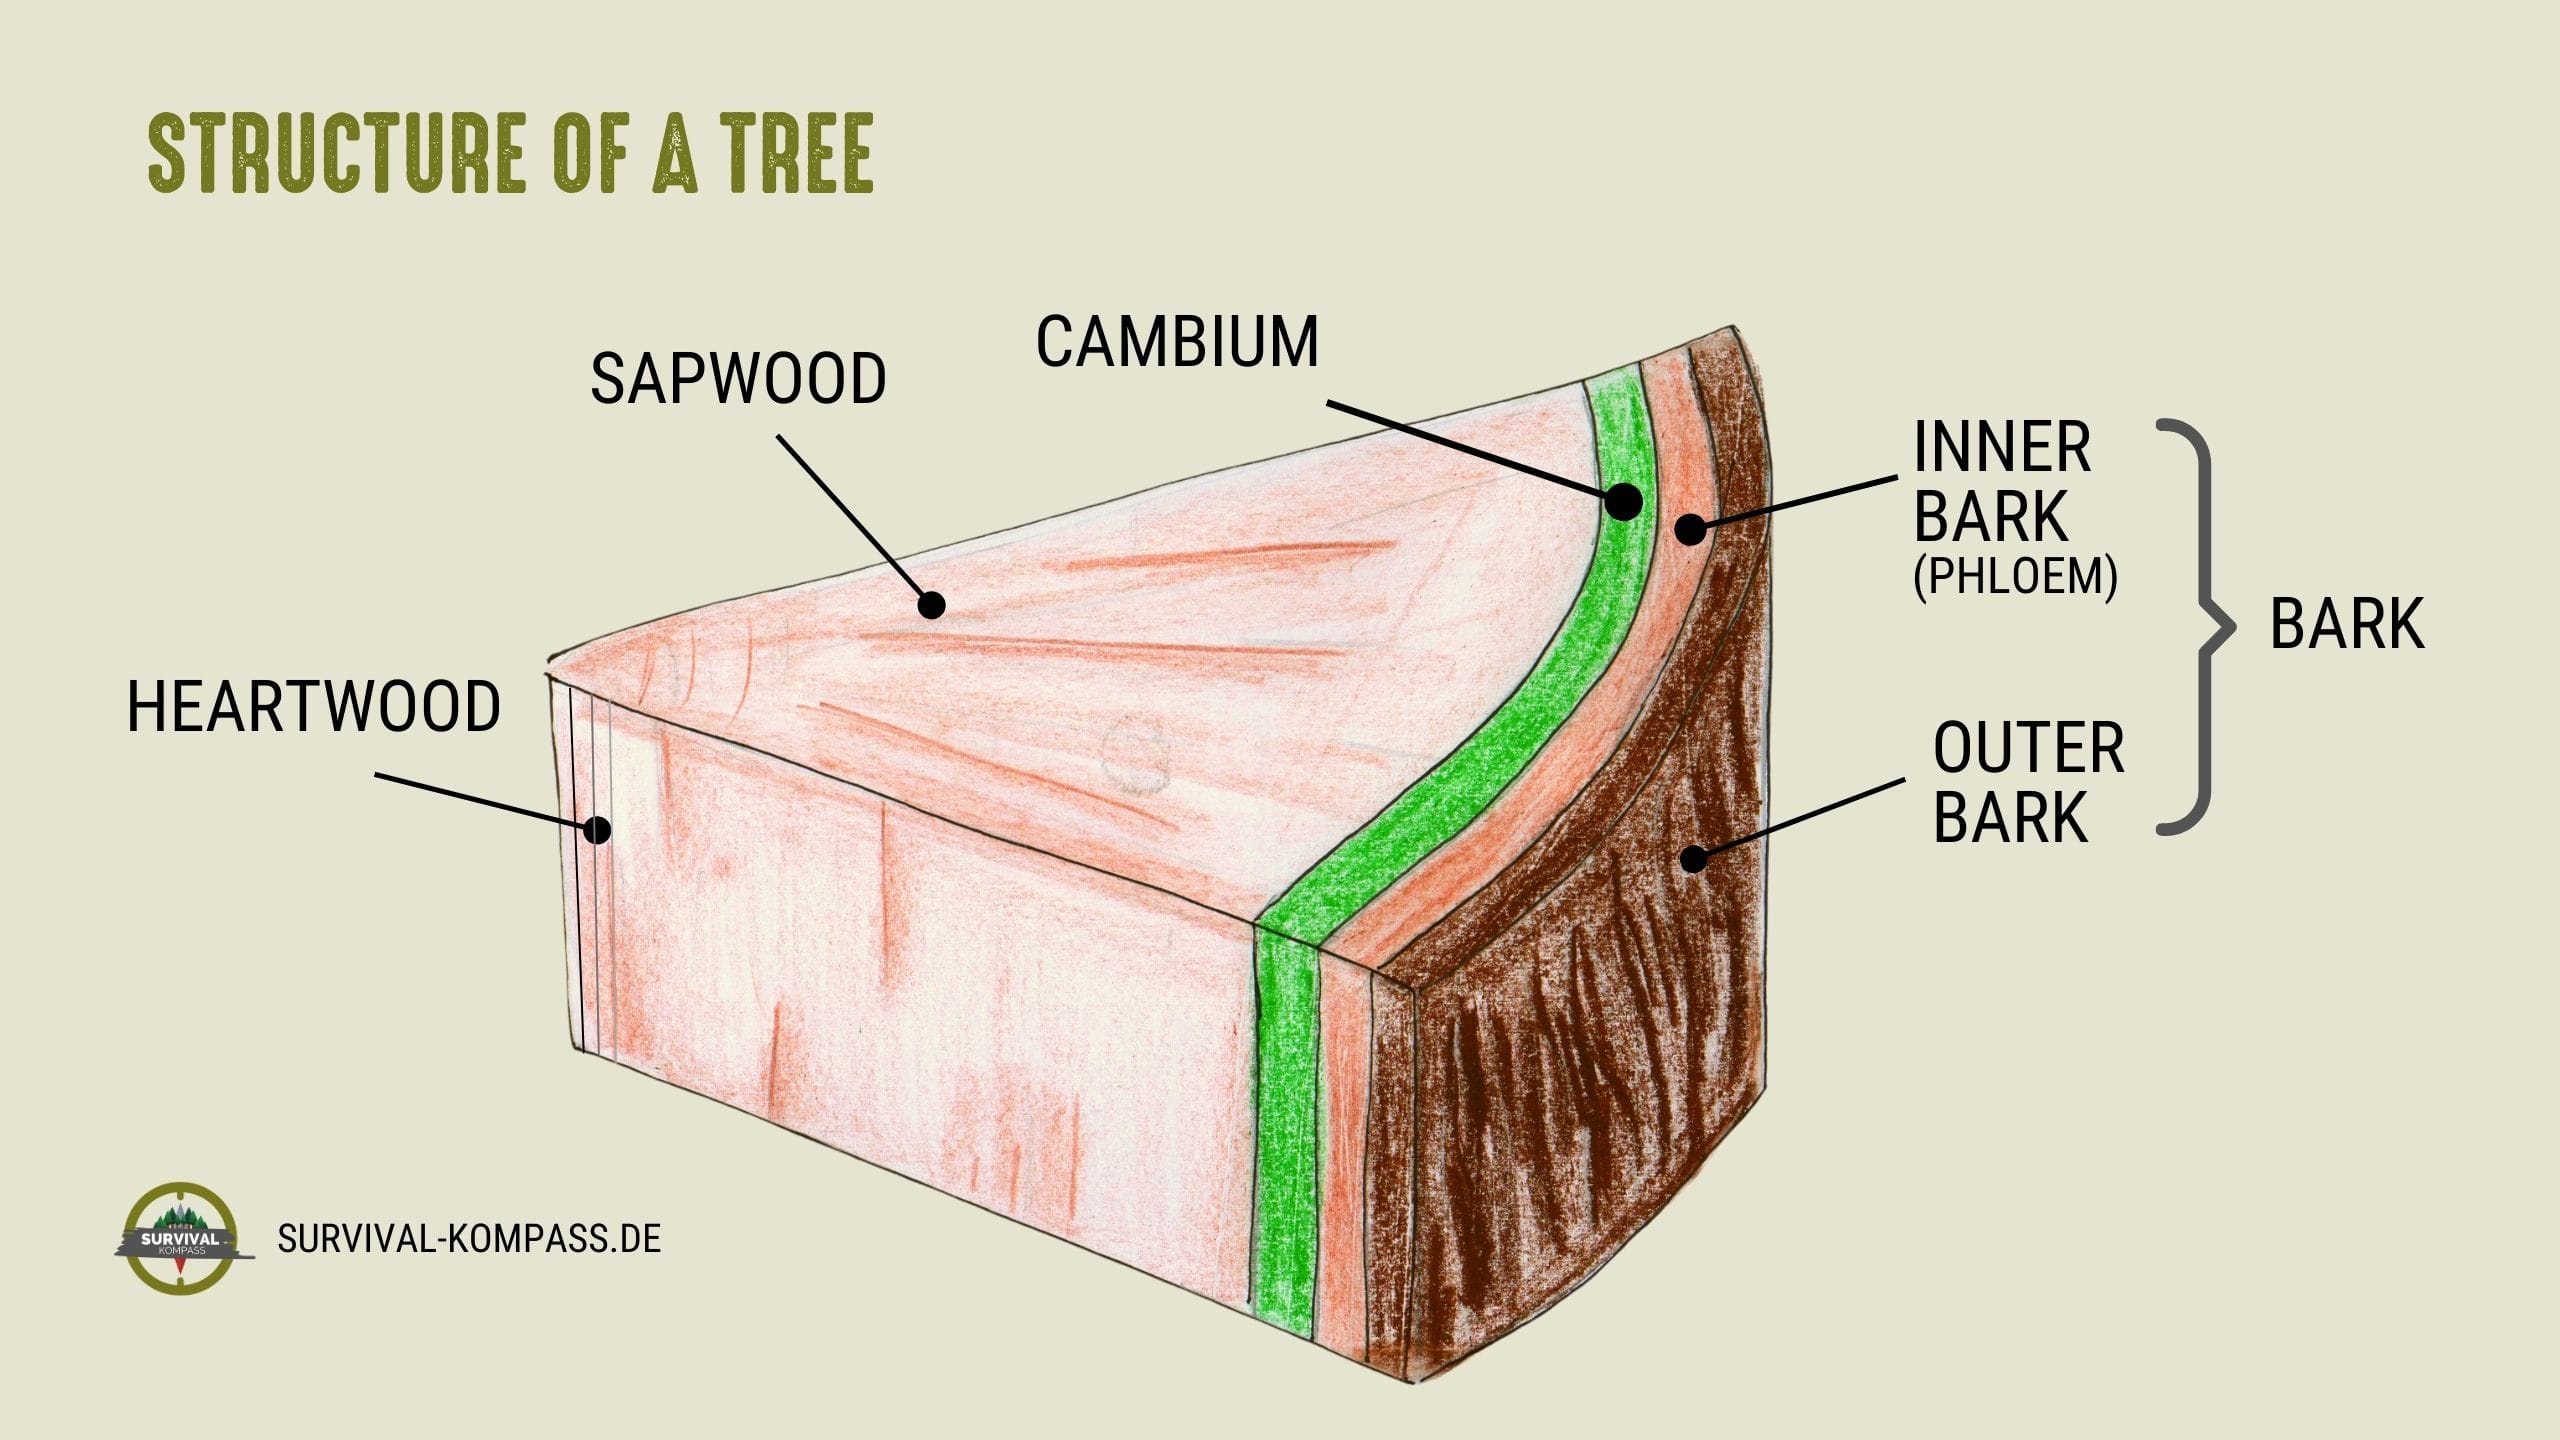 New tissue is exclusively formed in the cambium. The thin layer between bark and wood is responsible for the growth in diameter of a tree.